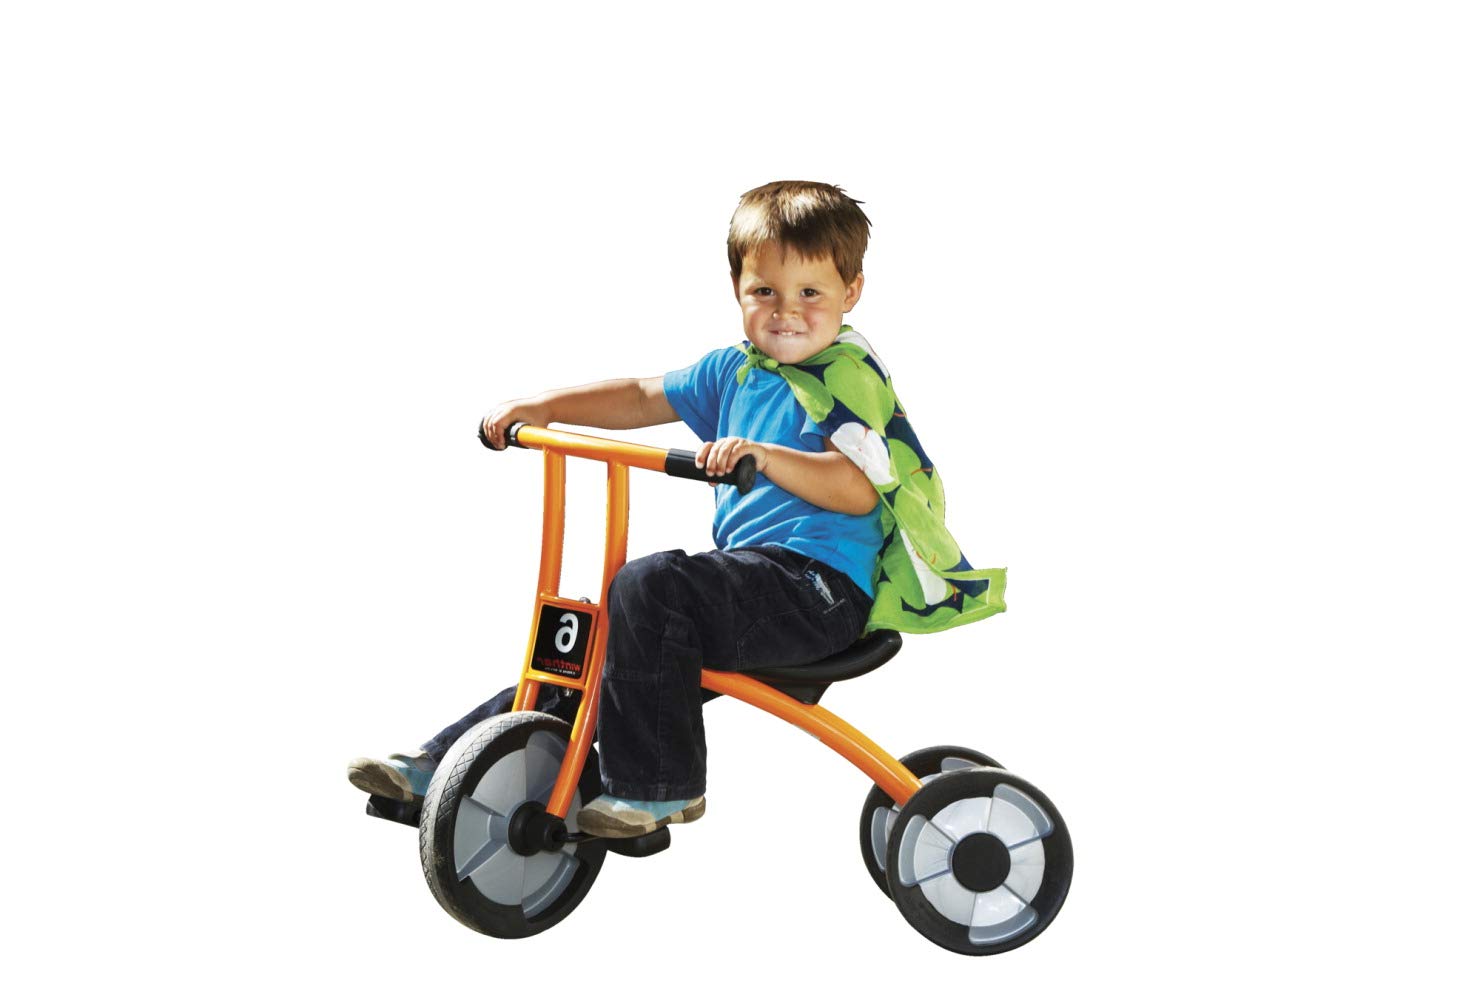 Childcraft - 1398980 Tricycle, 12 inches Seat Height, Orange